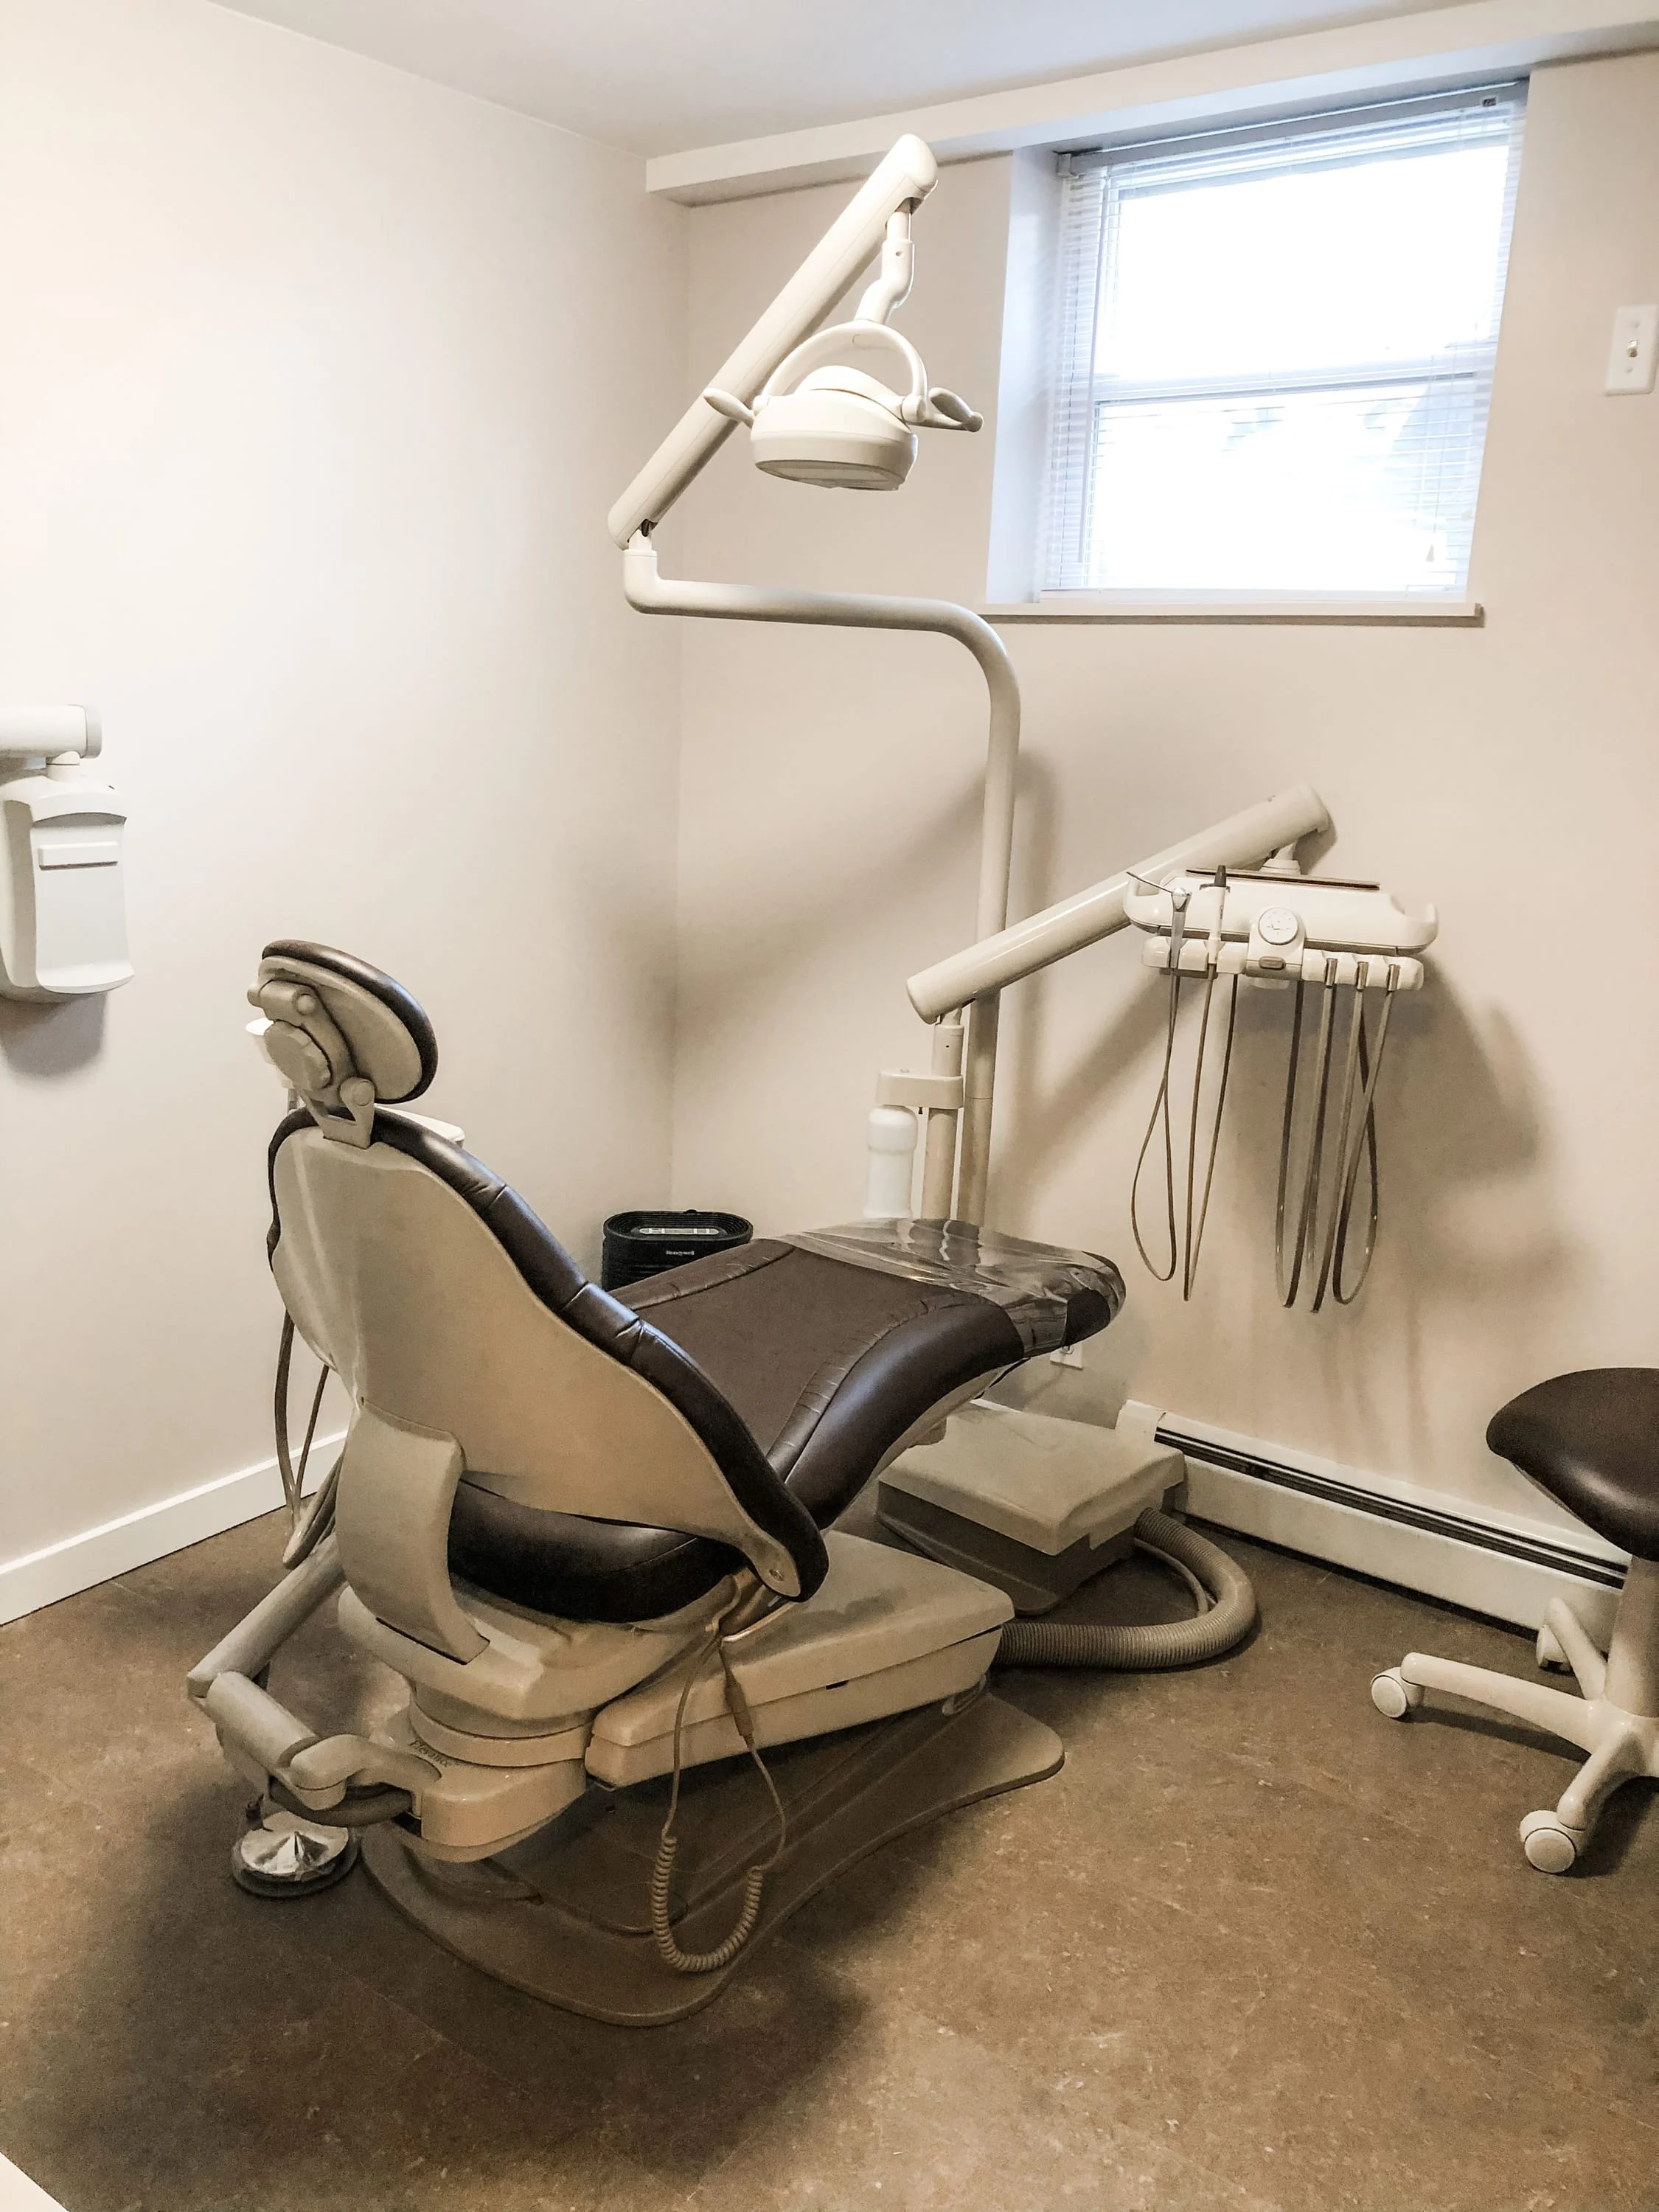 Our treatment room